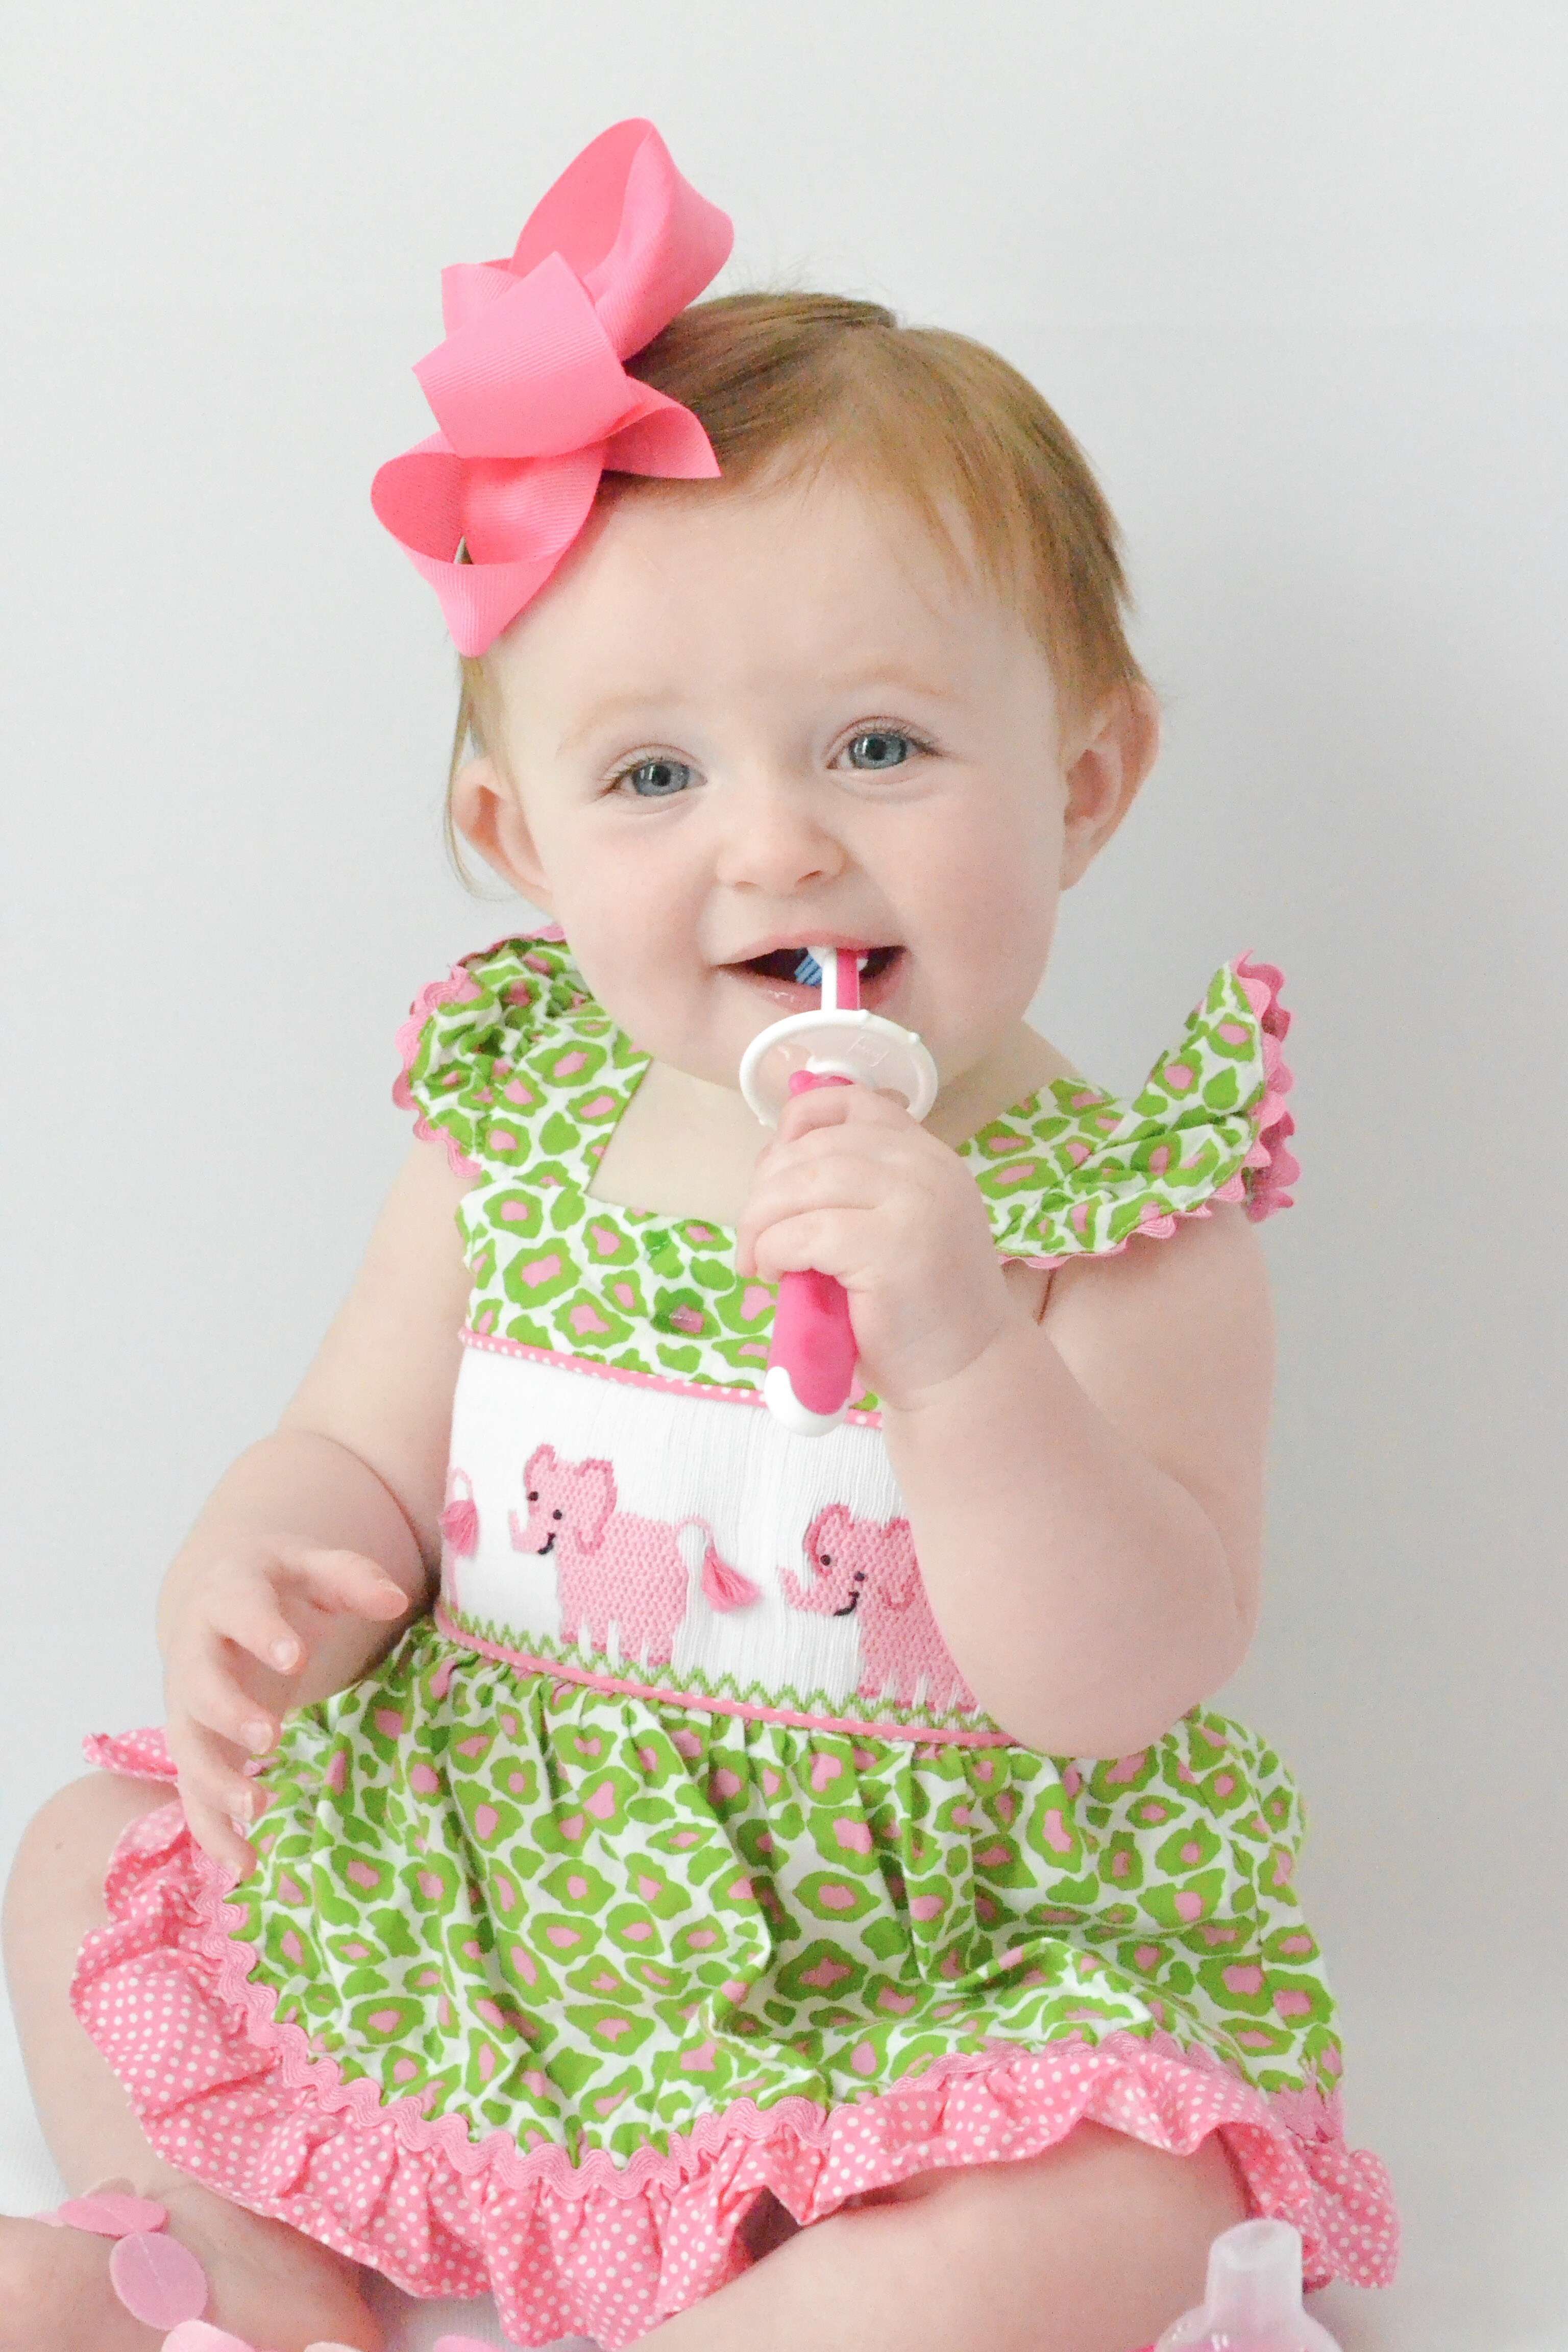 Our Top Teething and Baby Oral Care Finds